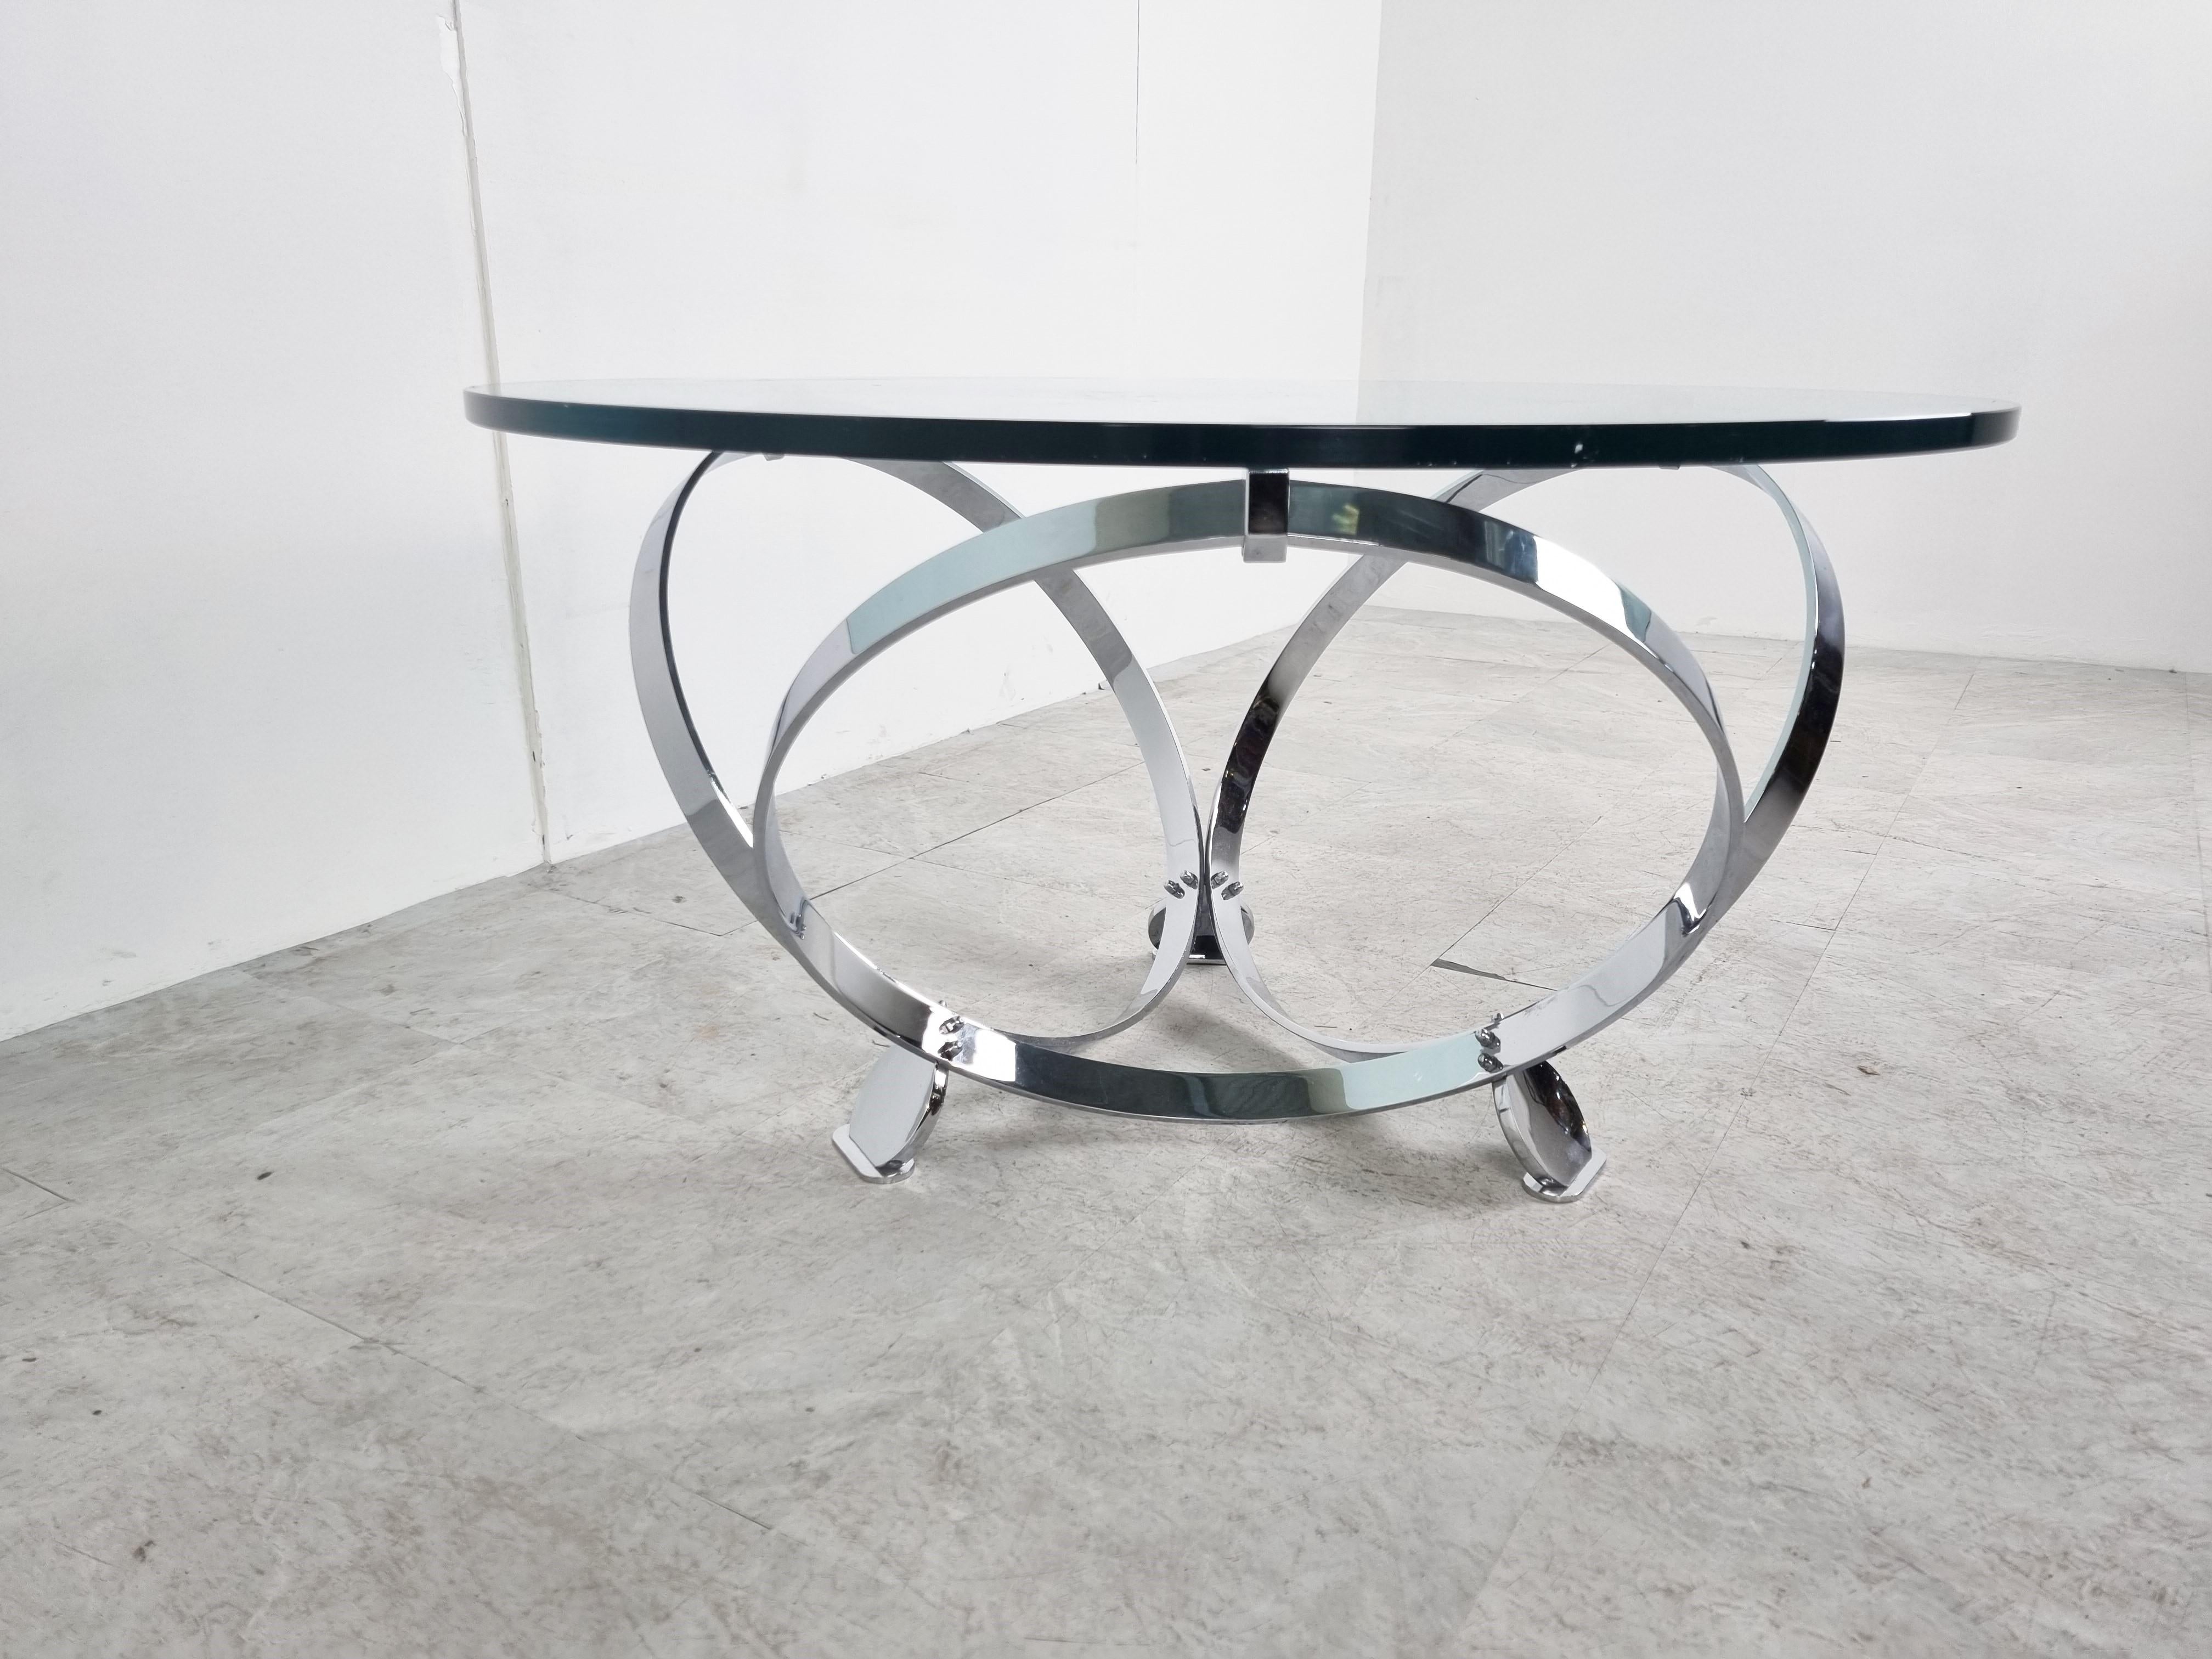 Midcentury 'diamond' coffee table by Knut Hesterberg for Ronald Schmitt.

The table has a clear round glass top with a sculptural aluminium base.

Timeless design.

Good condition.

1960s, Germany

Measures: Height 51cm/20.07